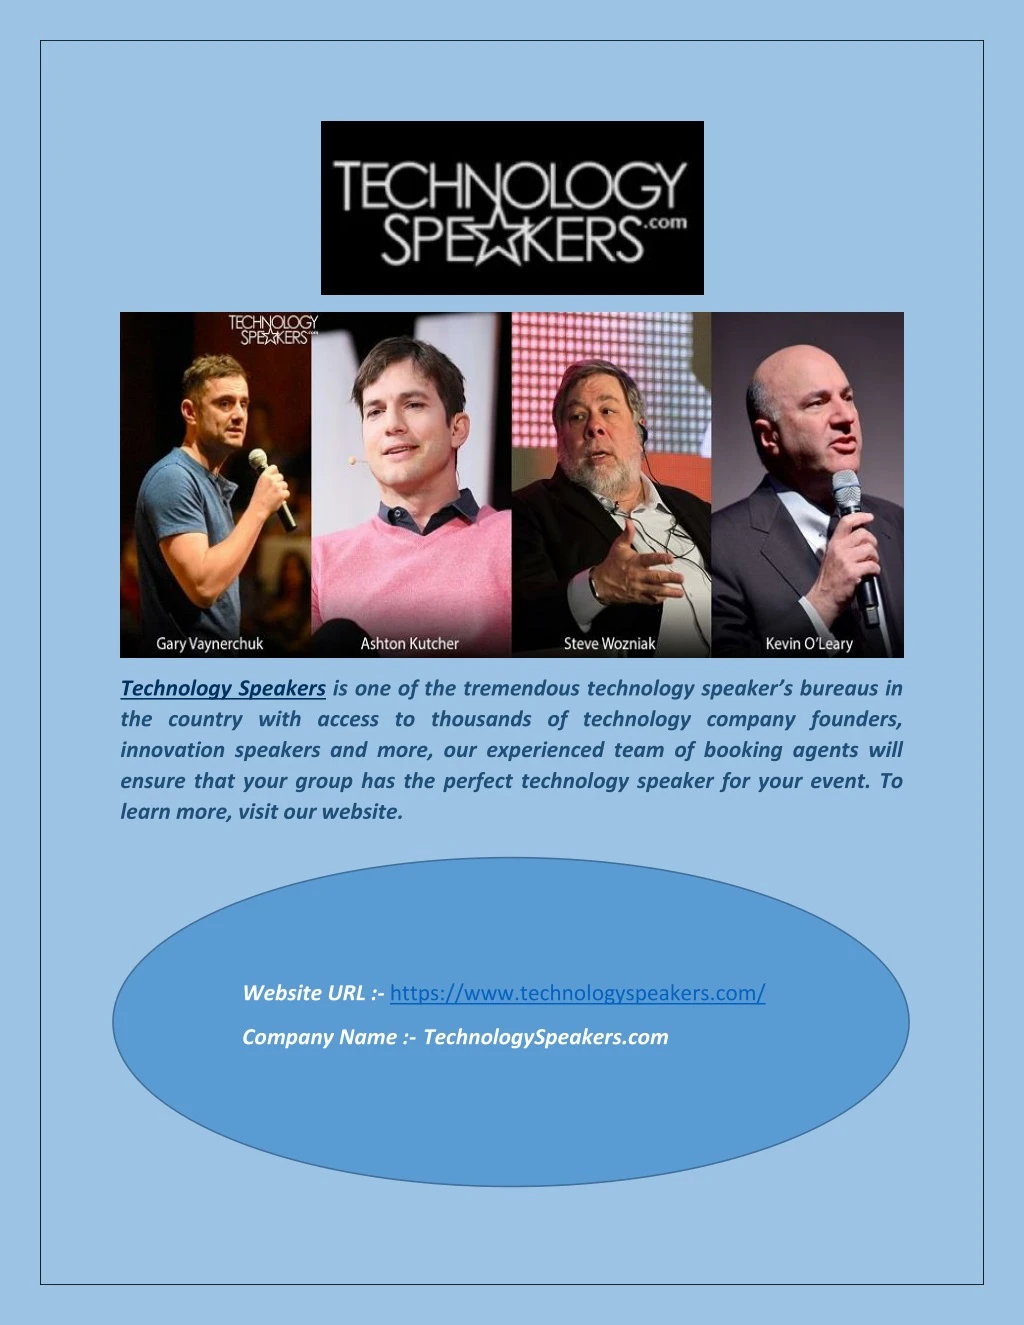 technology speakers is one of the tremendous